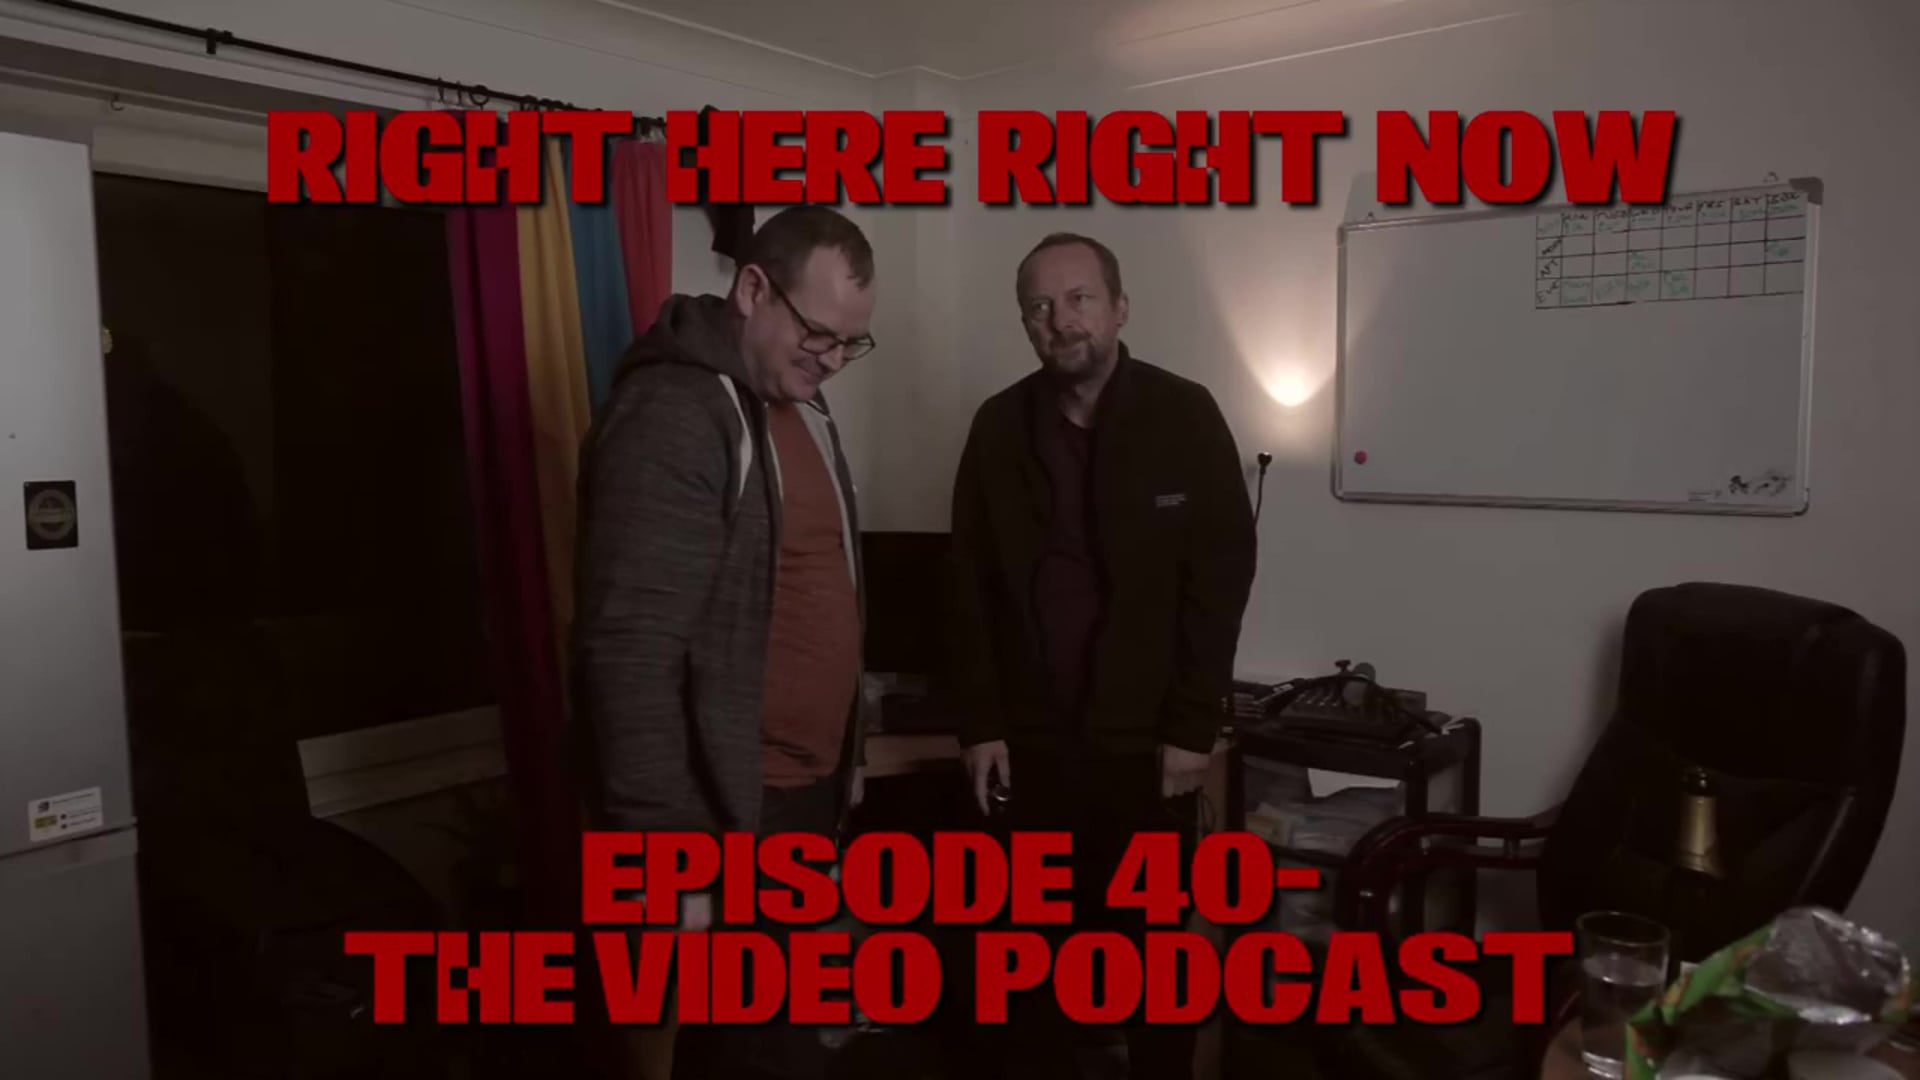 Watch Right Here Right Now: Episode 40 (Video Podcast) on our Free Roku Channel